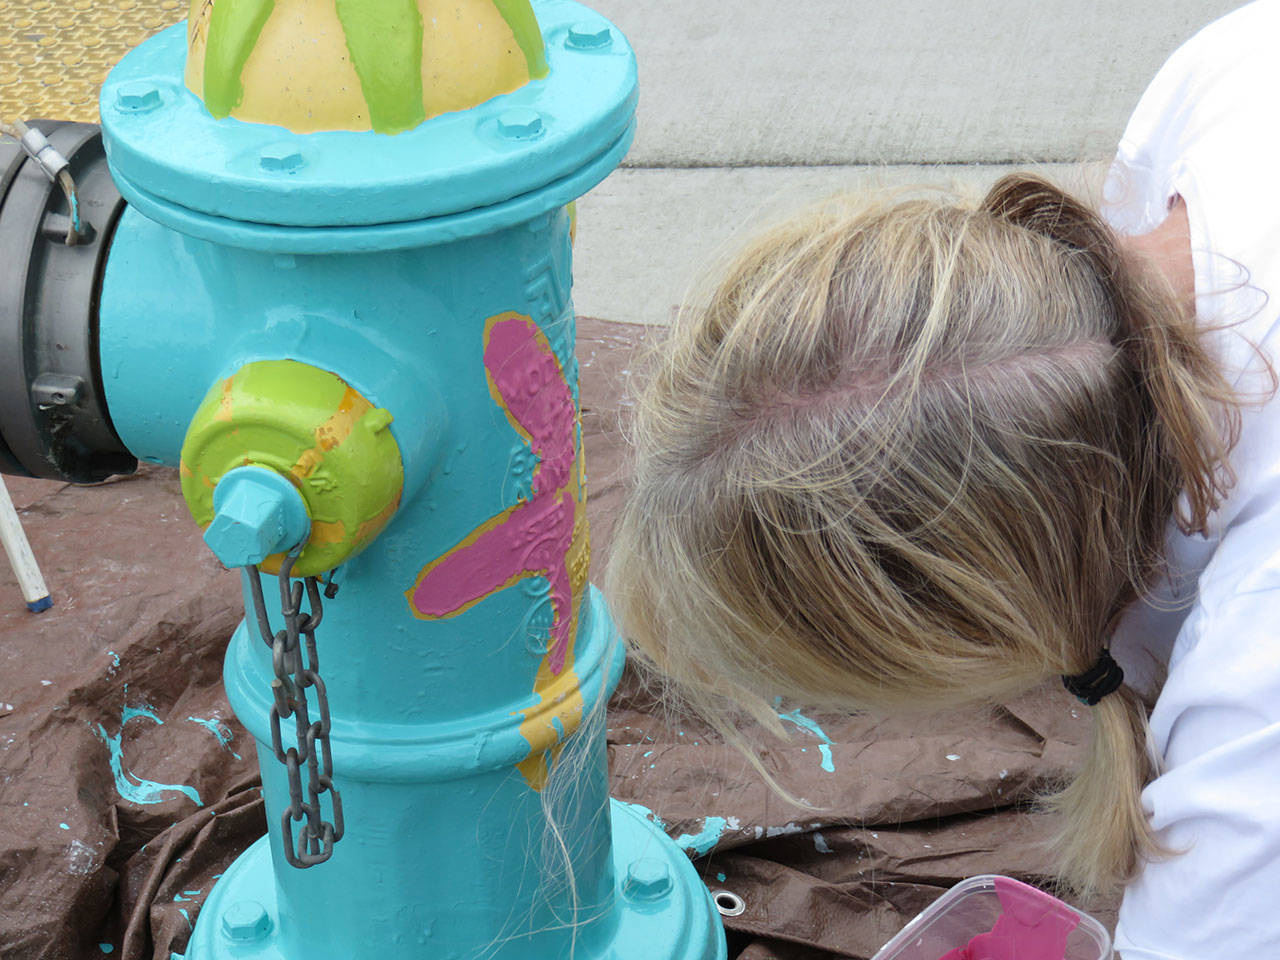 Artist Lizbeth Cort leans into the fire hydrant she painted on July 20. Photo provided by the Oak Harbor Arts Commission.